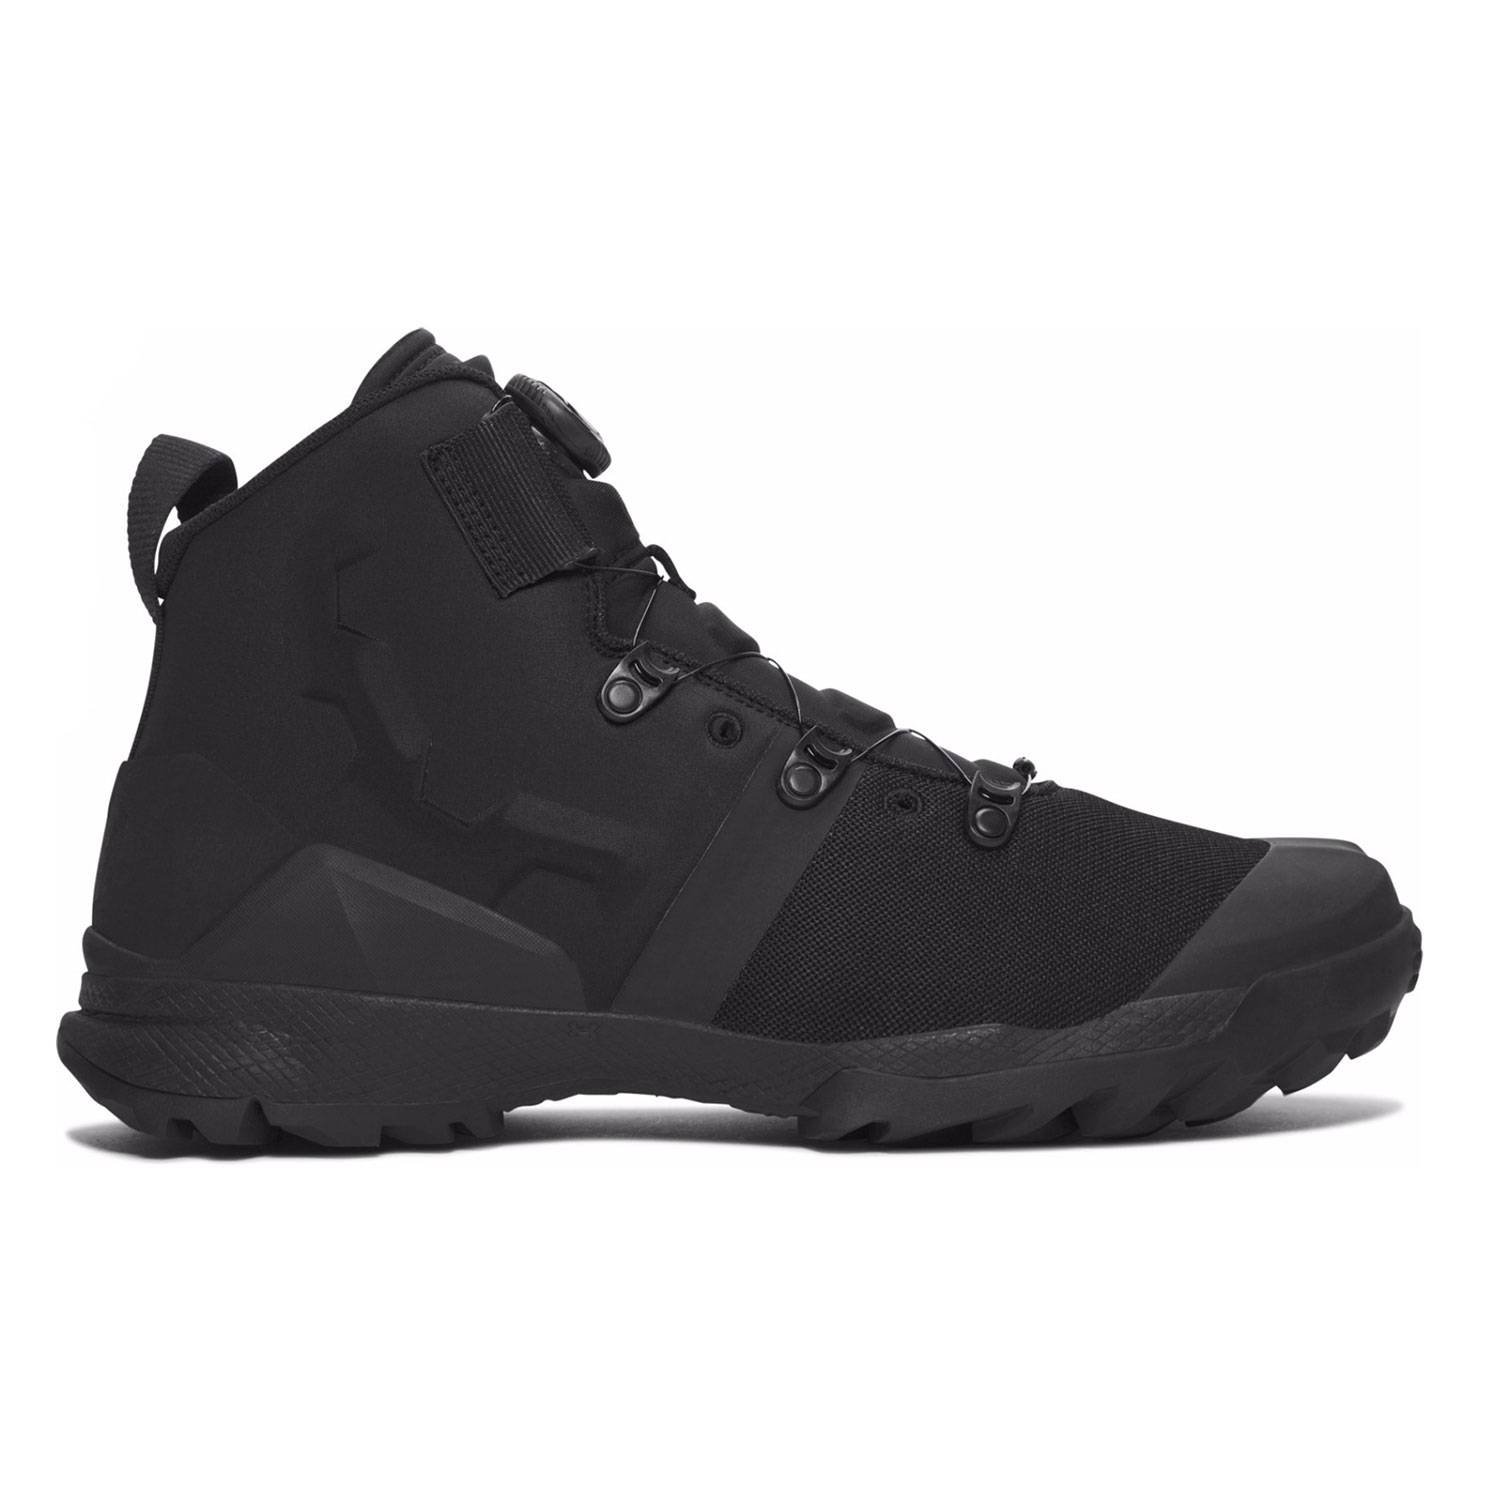 Under Armour Infil Tactical Boots